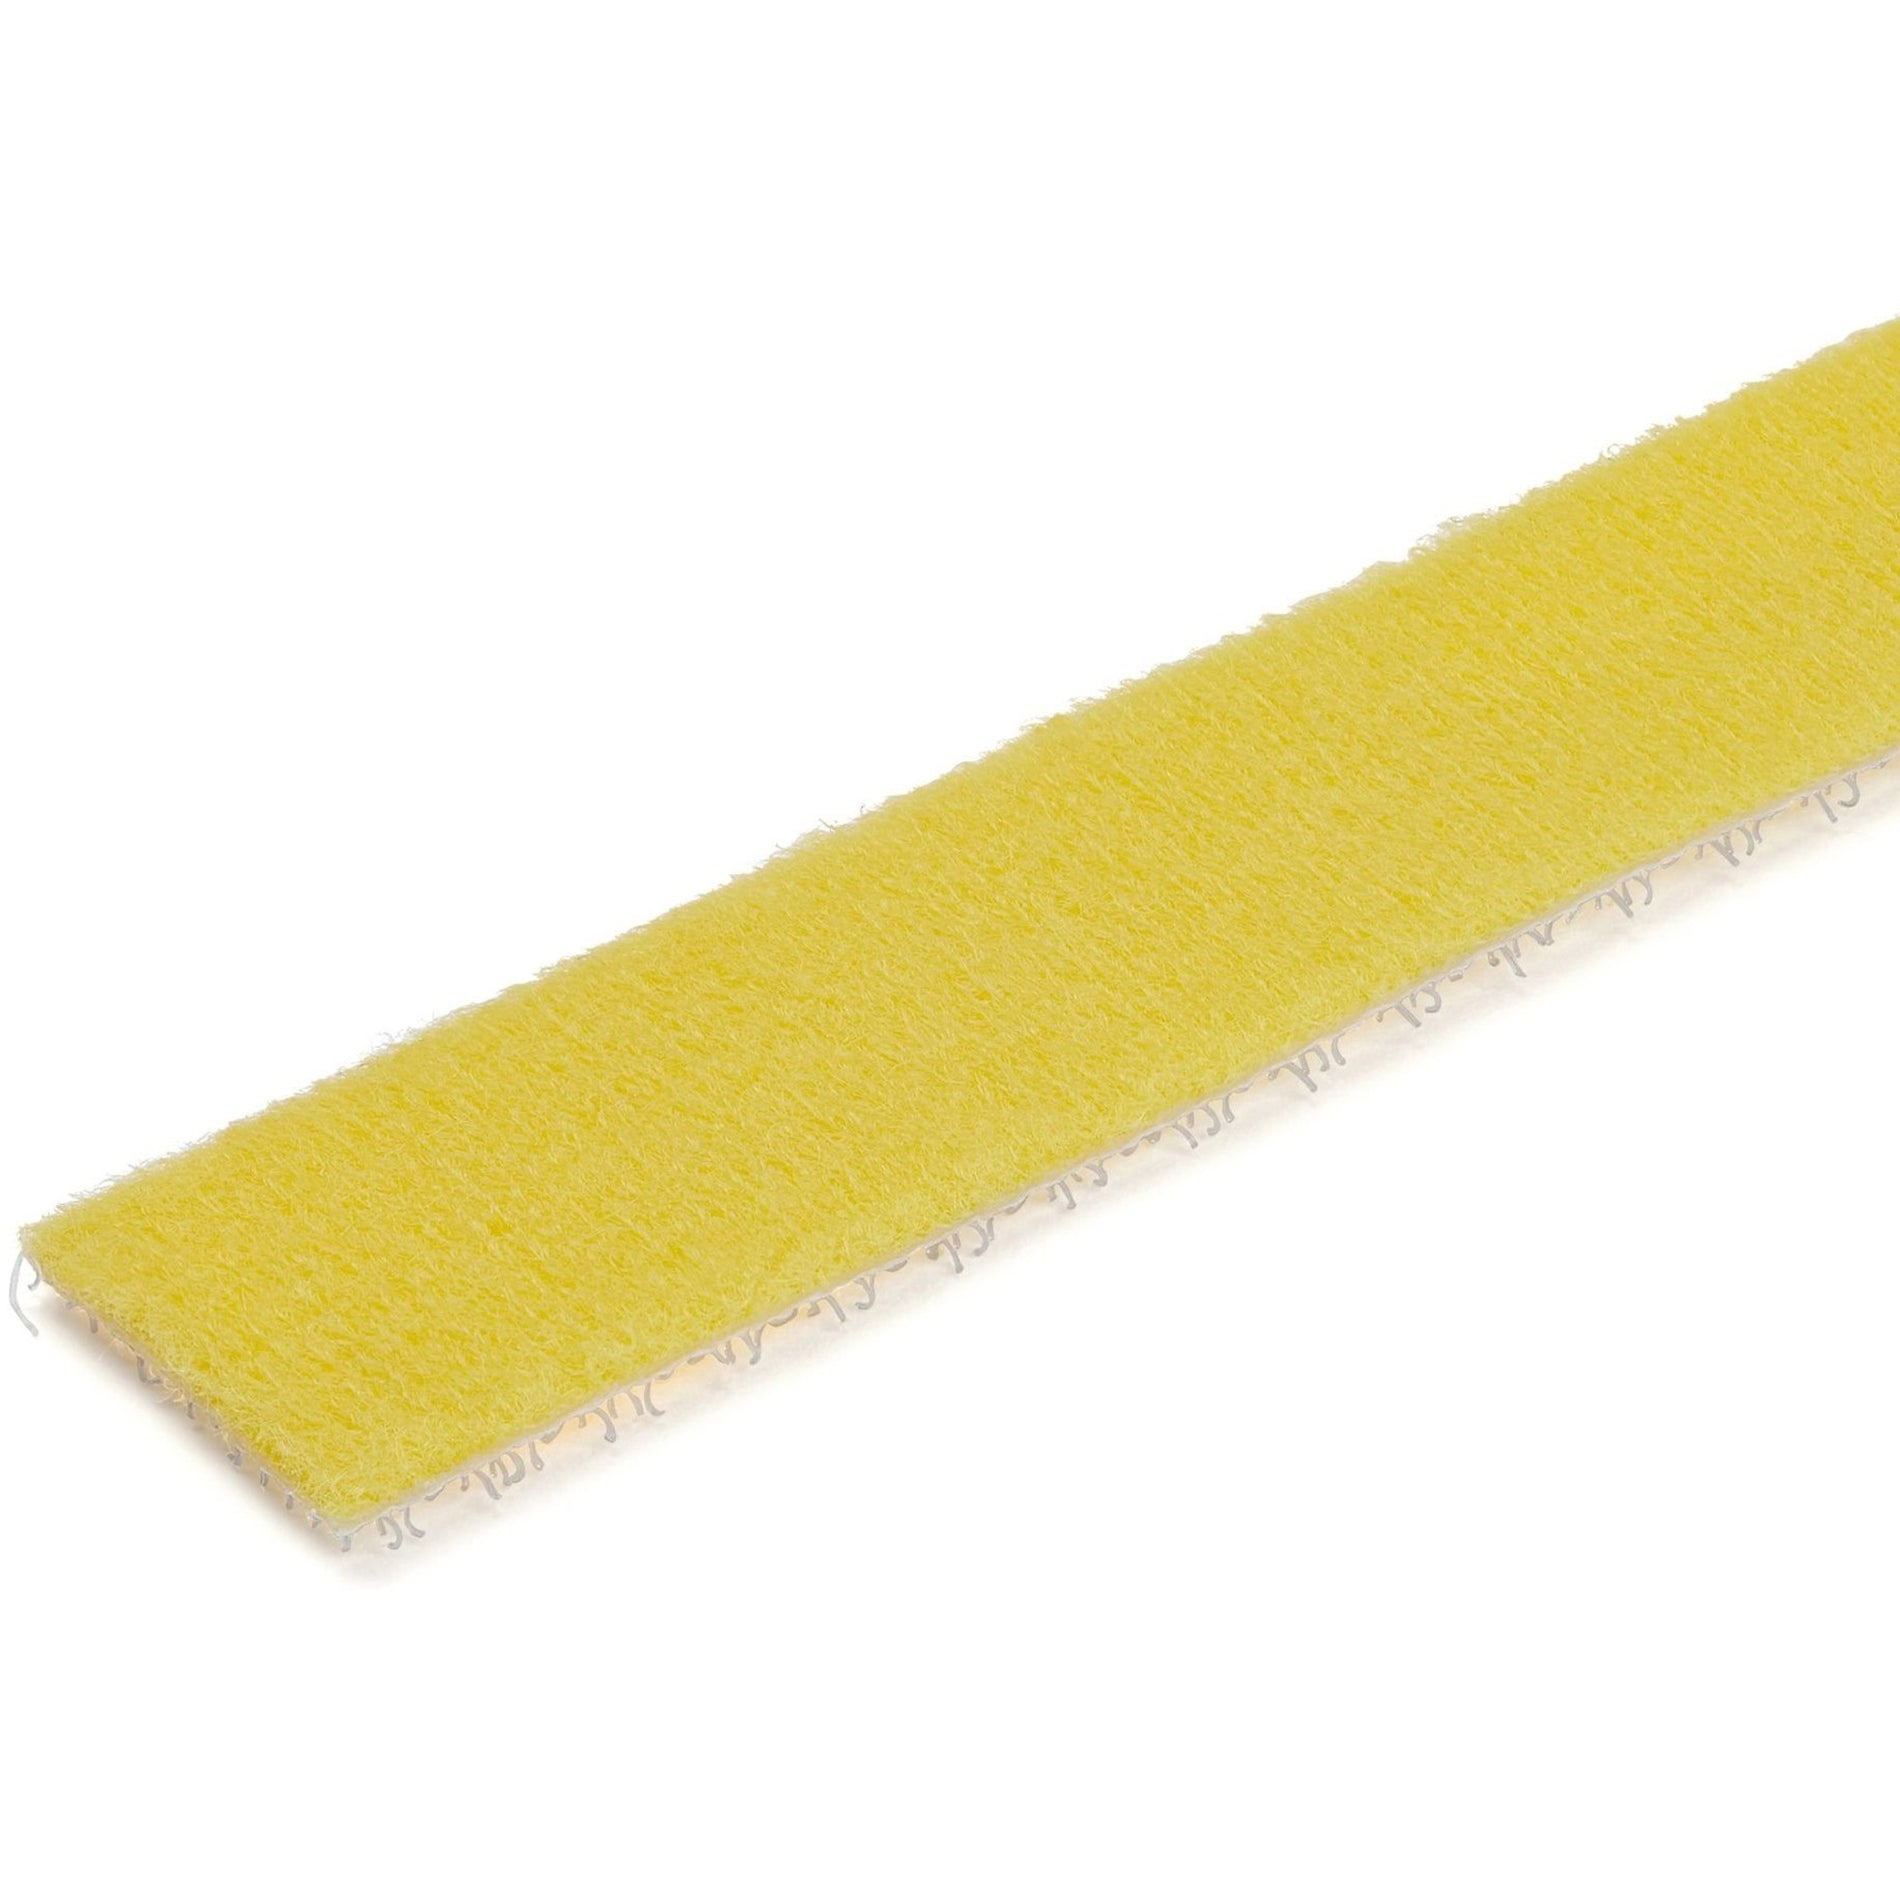 StarTech.com HKLP25YW 25ft. Hook and Loop Roll - Yellow, Cable Management